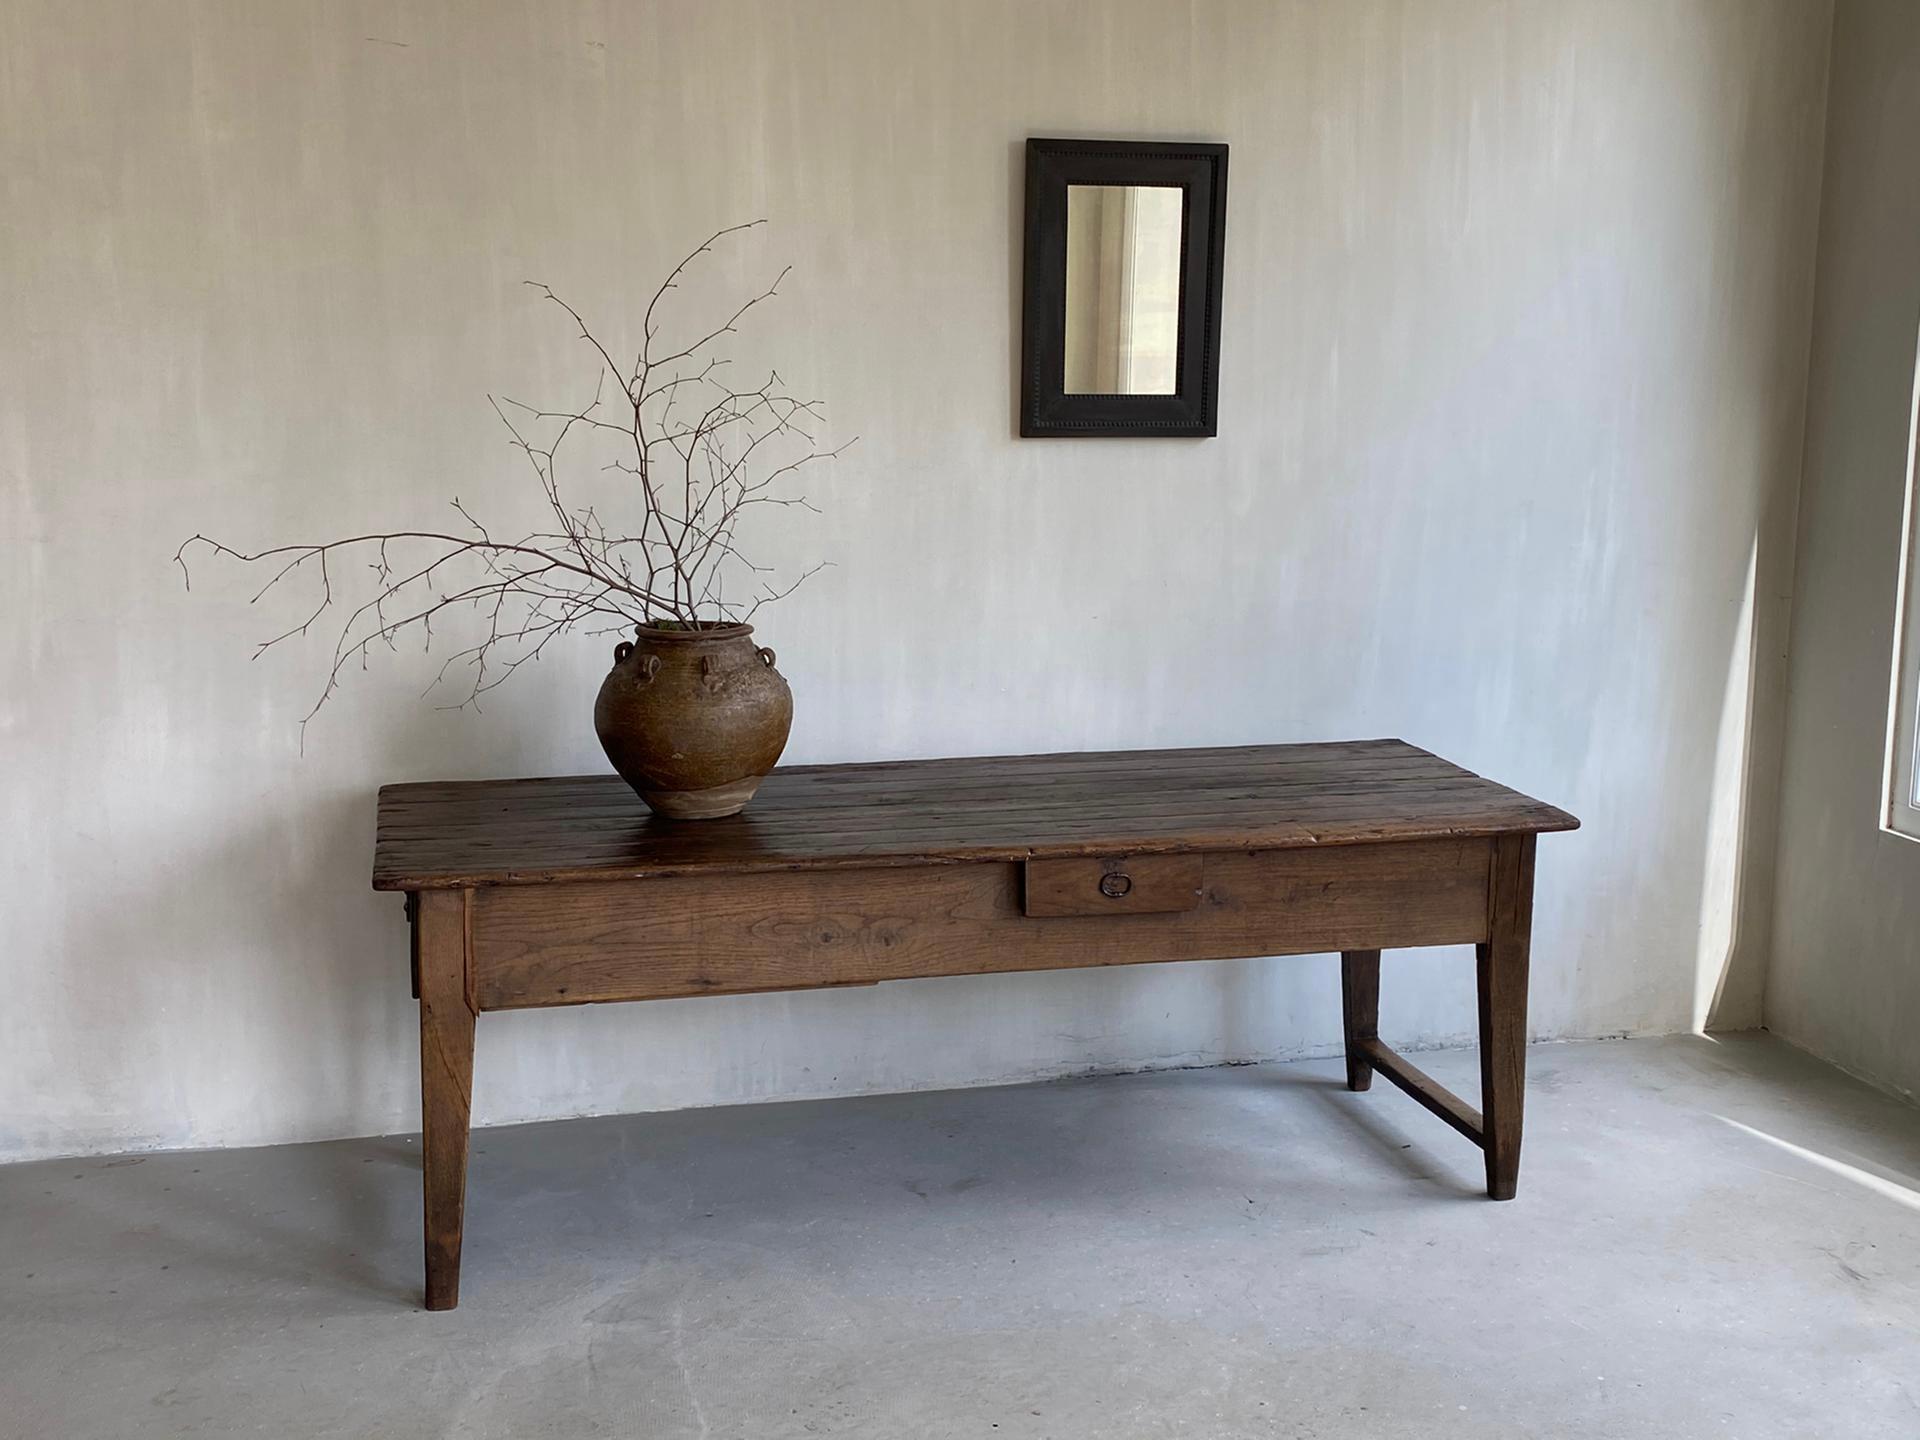 French console table, early 19th C. Originating from Provence. 
Very nice traces of use.
The table has 2 extra large side sliders and 1 small slider at the front.